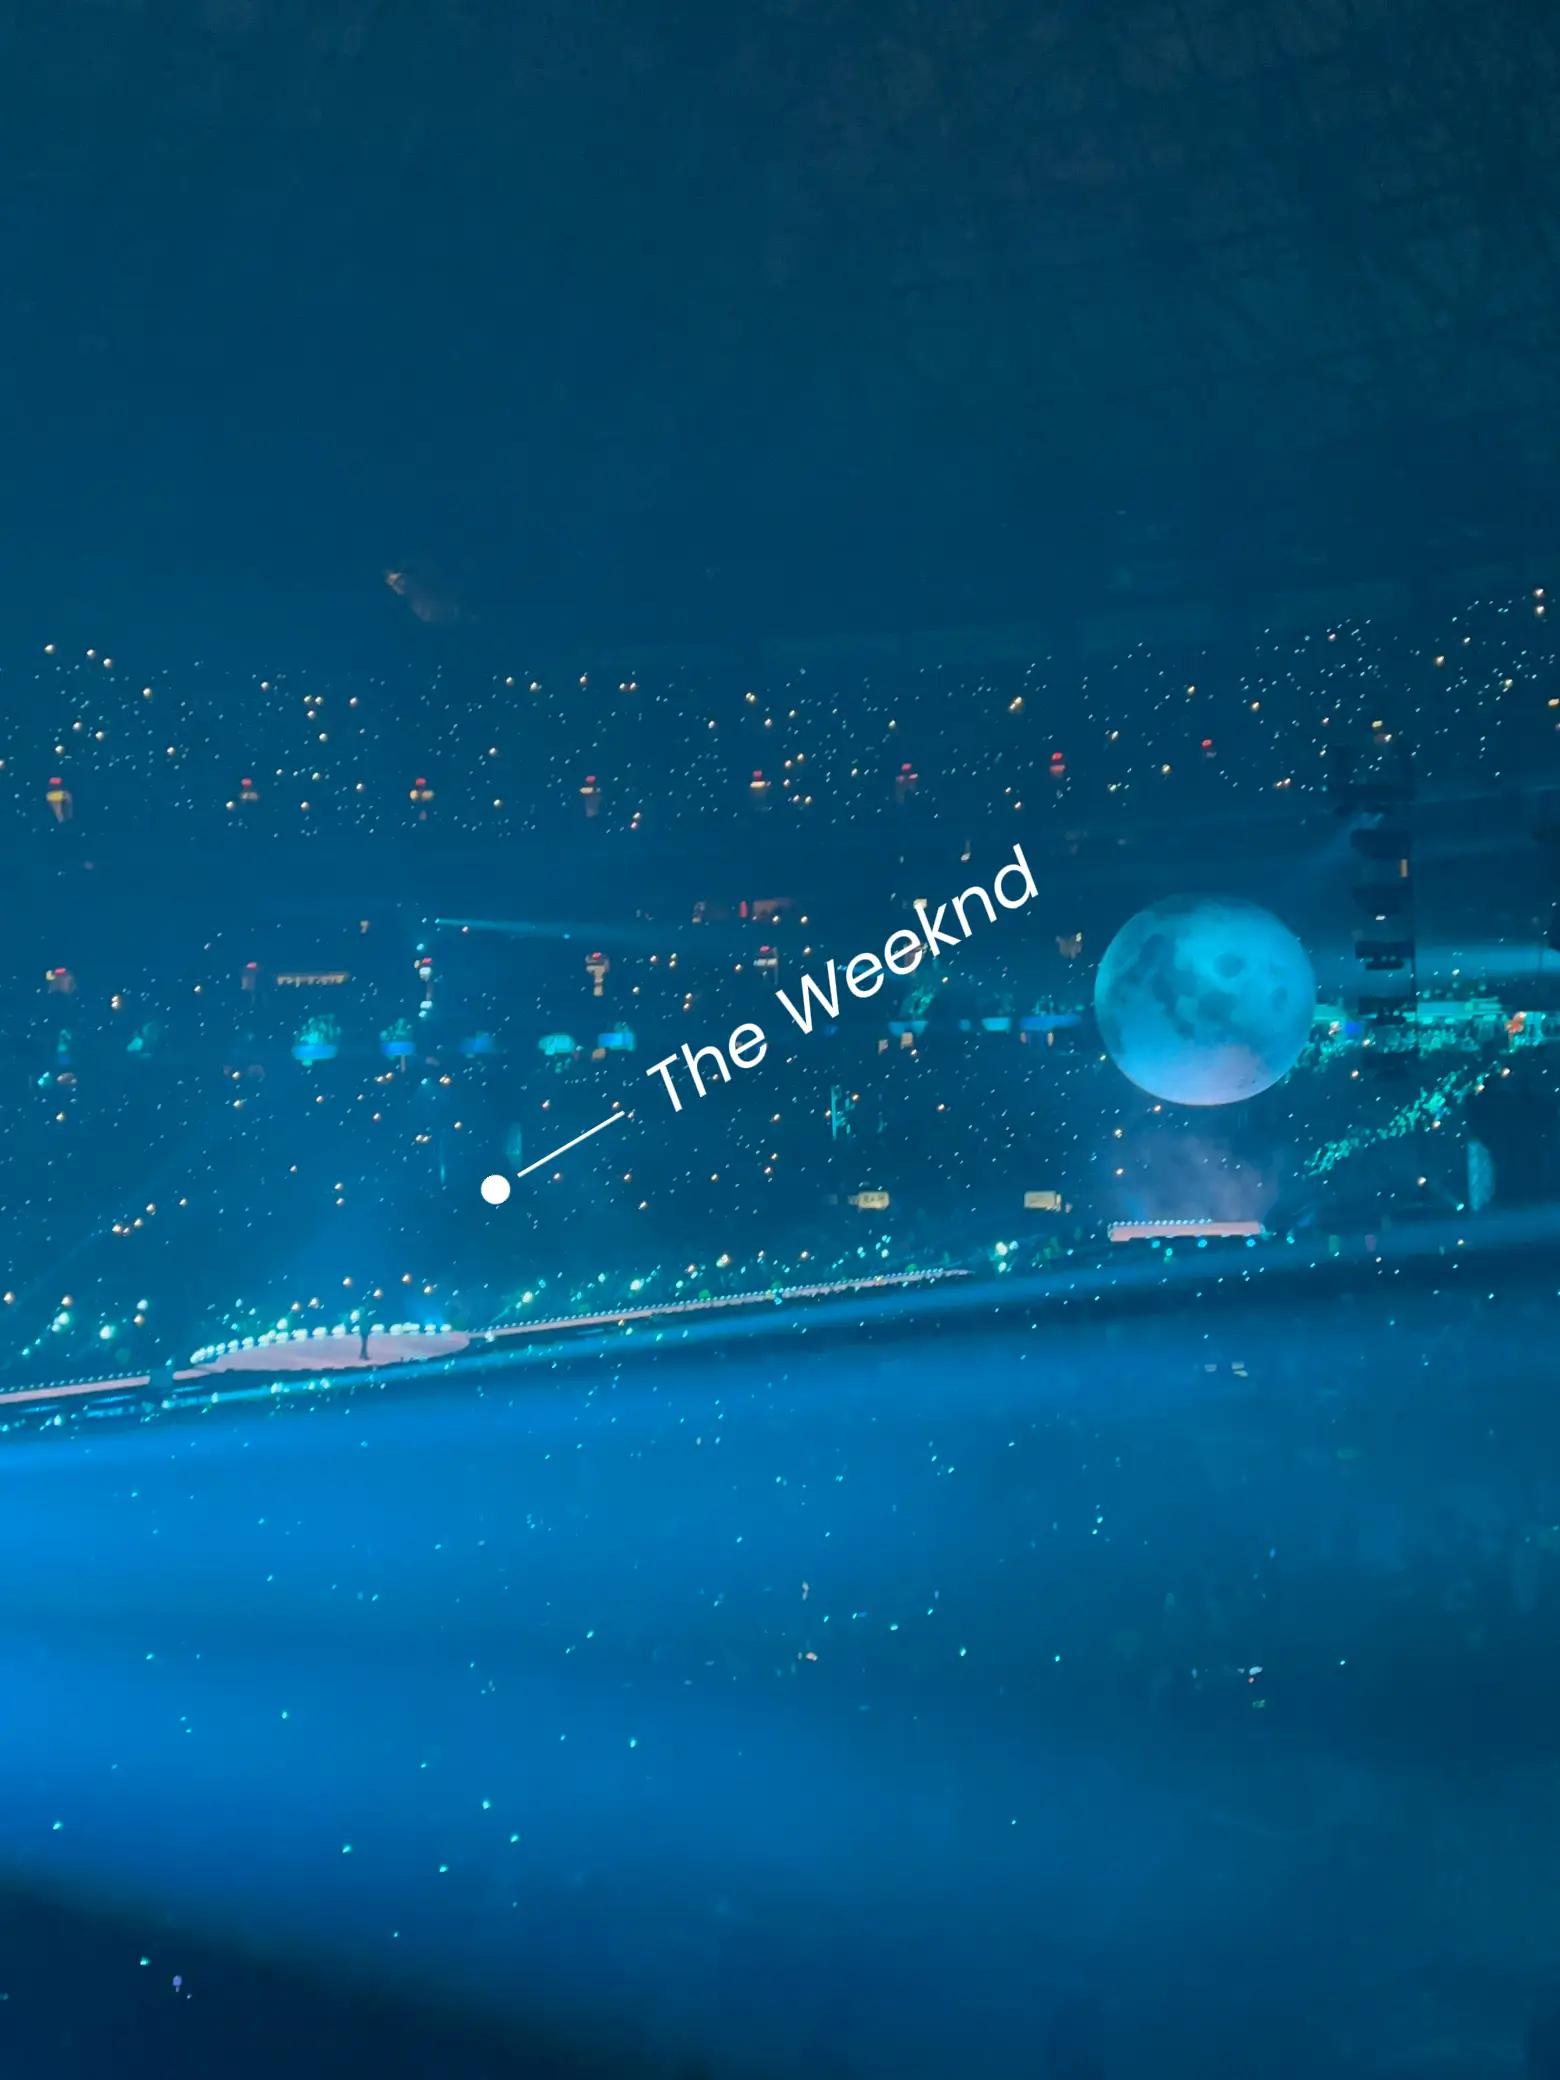  A concert with a large audience. The weeknd is playing at the event.